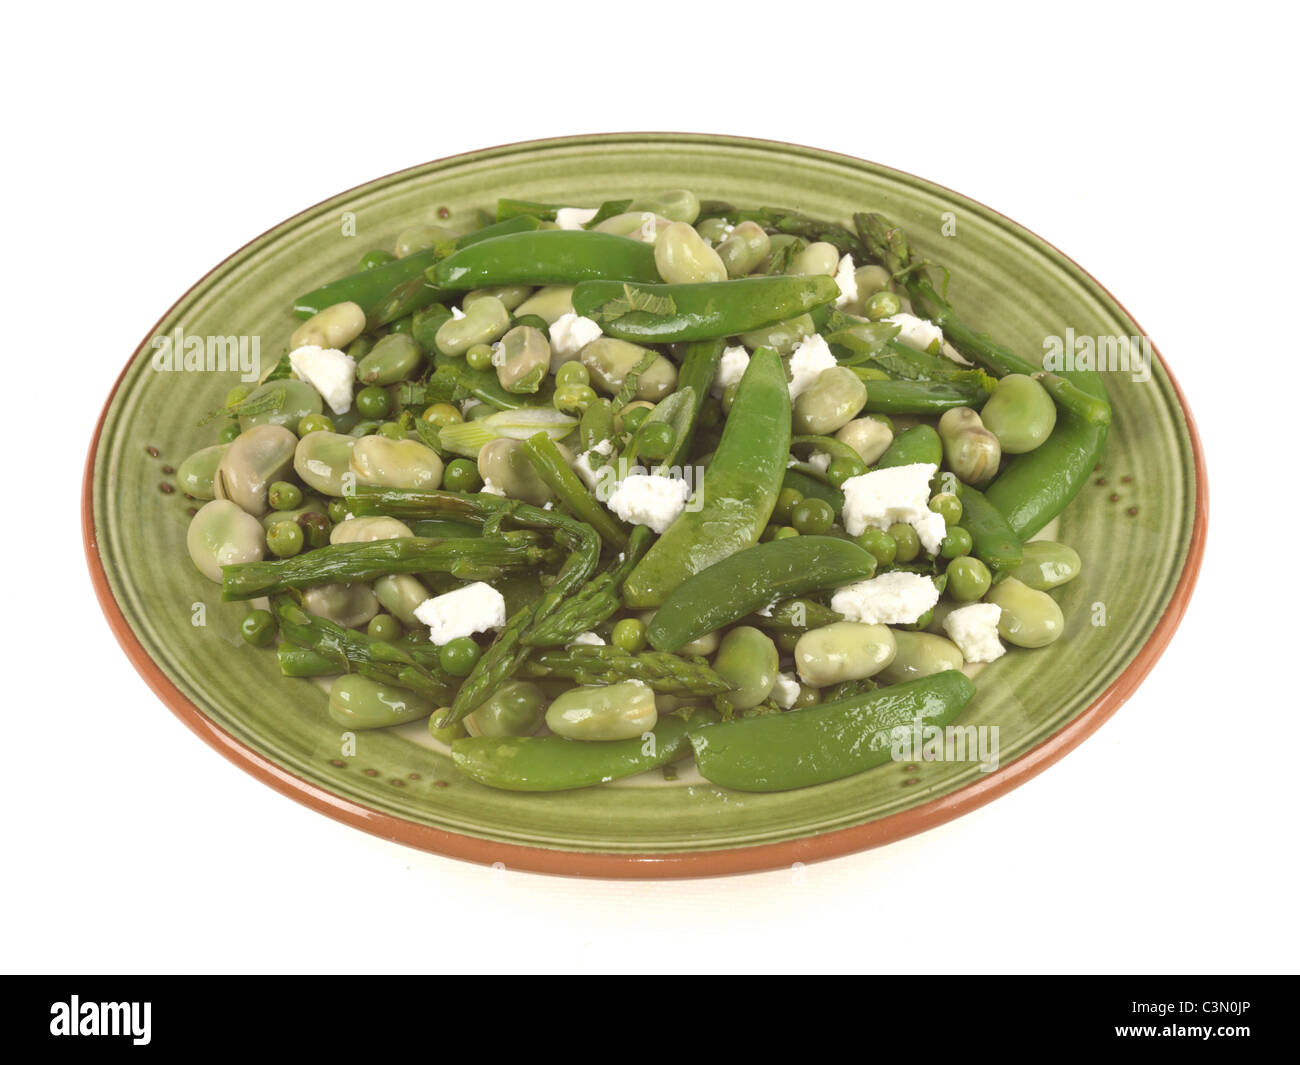 Freshly Prepared Health Broad Bean Salad With Fresh Peas And Feta Cheese Against A White Background With No People And A Clipping Path Stock Photo